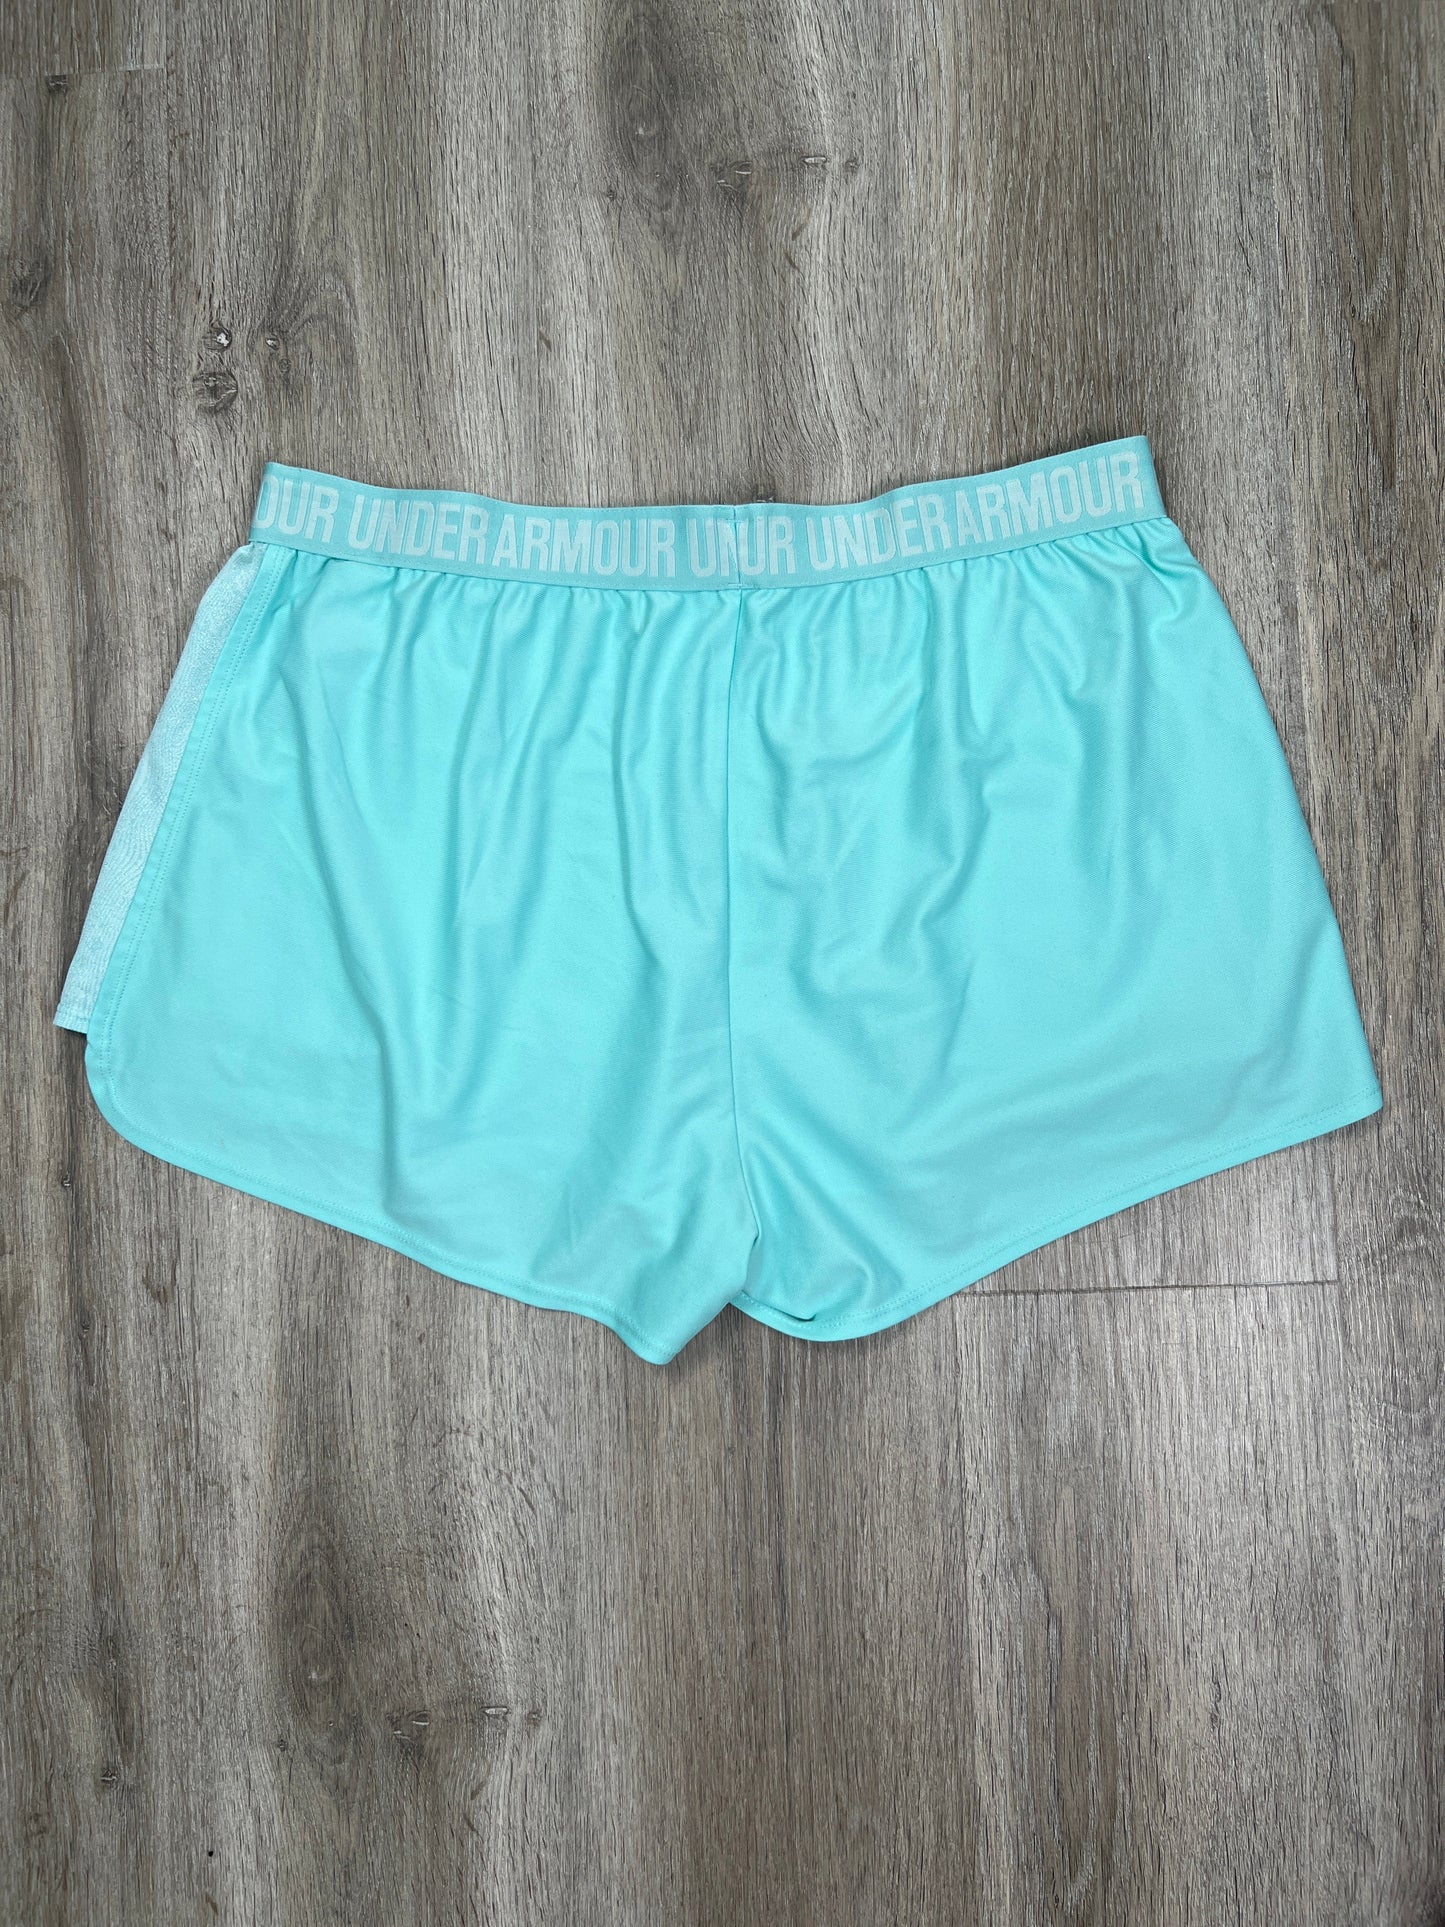 Blue Athletic Shorts Under Armour, Size 2x